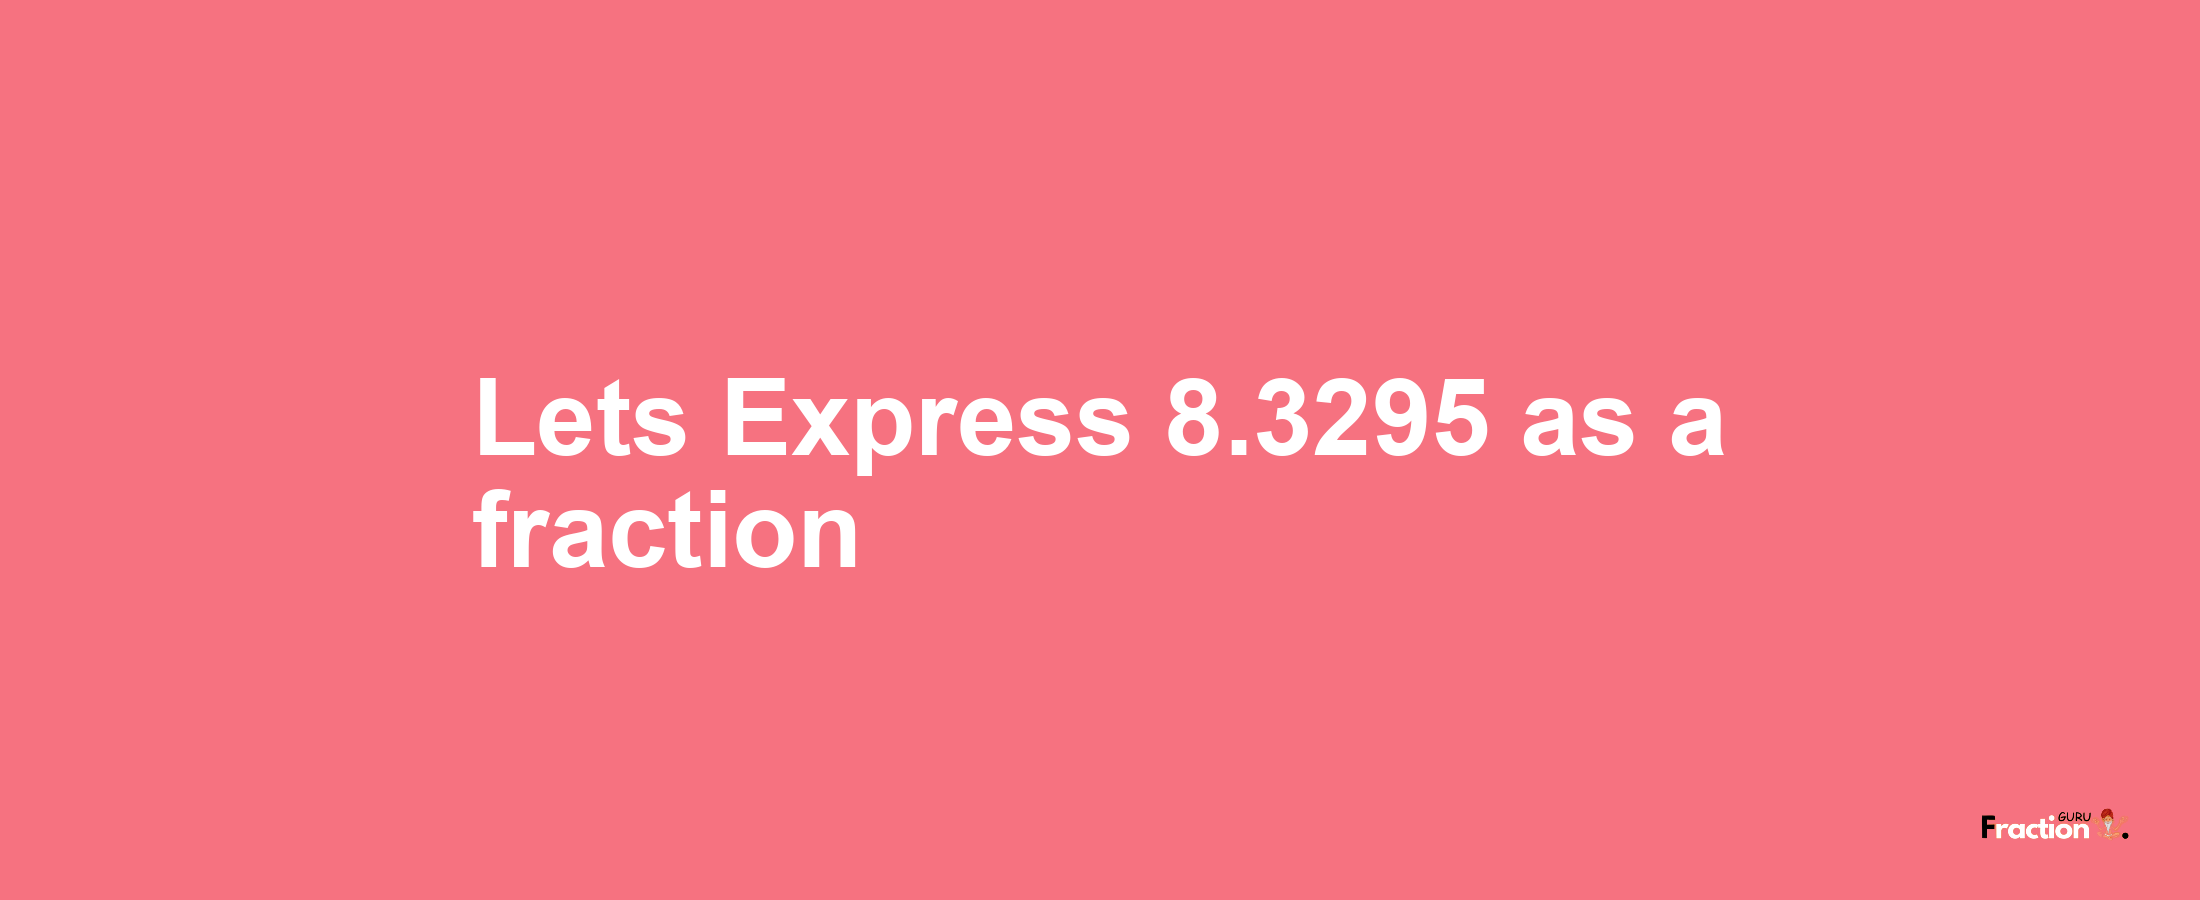 Lets Express 8.3295 as afraction